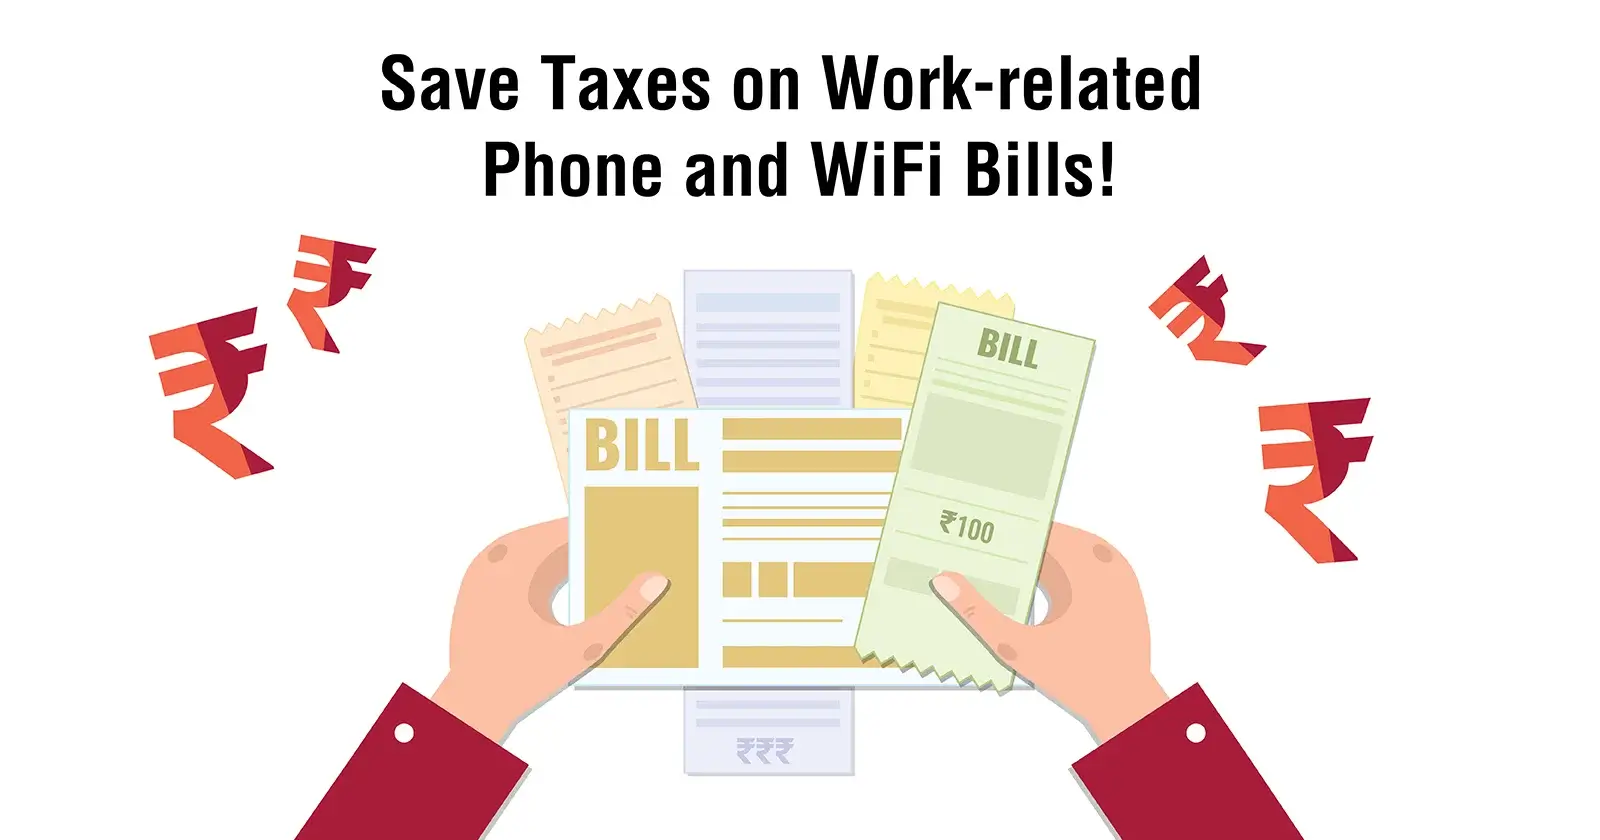 What Percentage of Cell Phone Bill Can I Deduct?